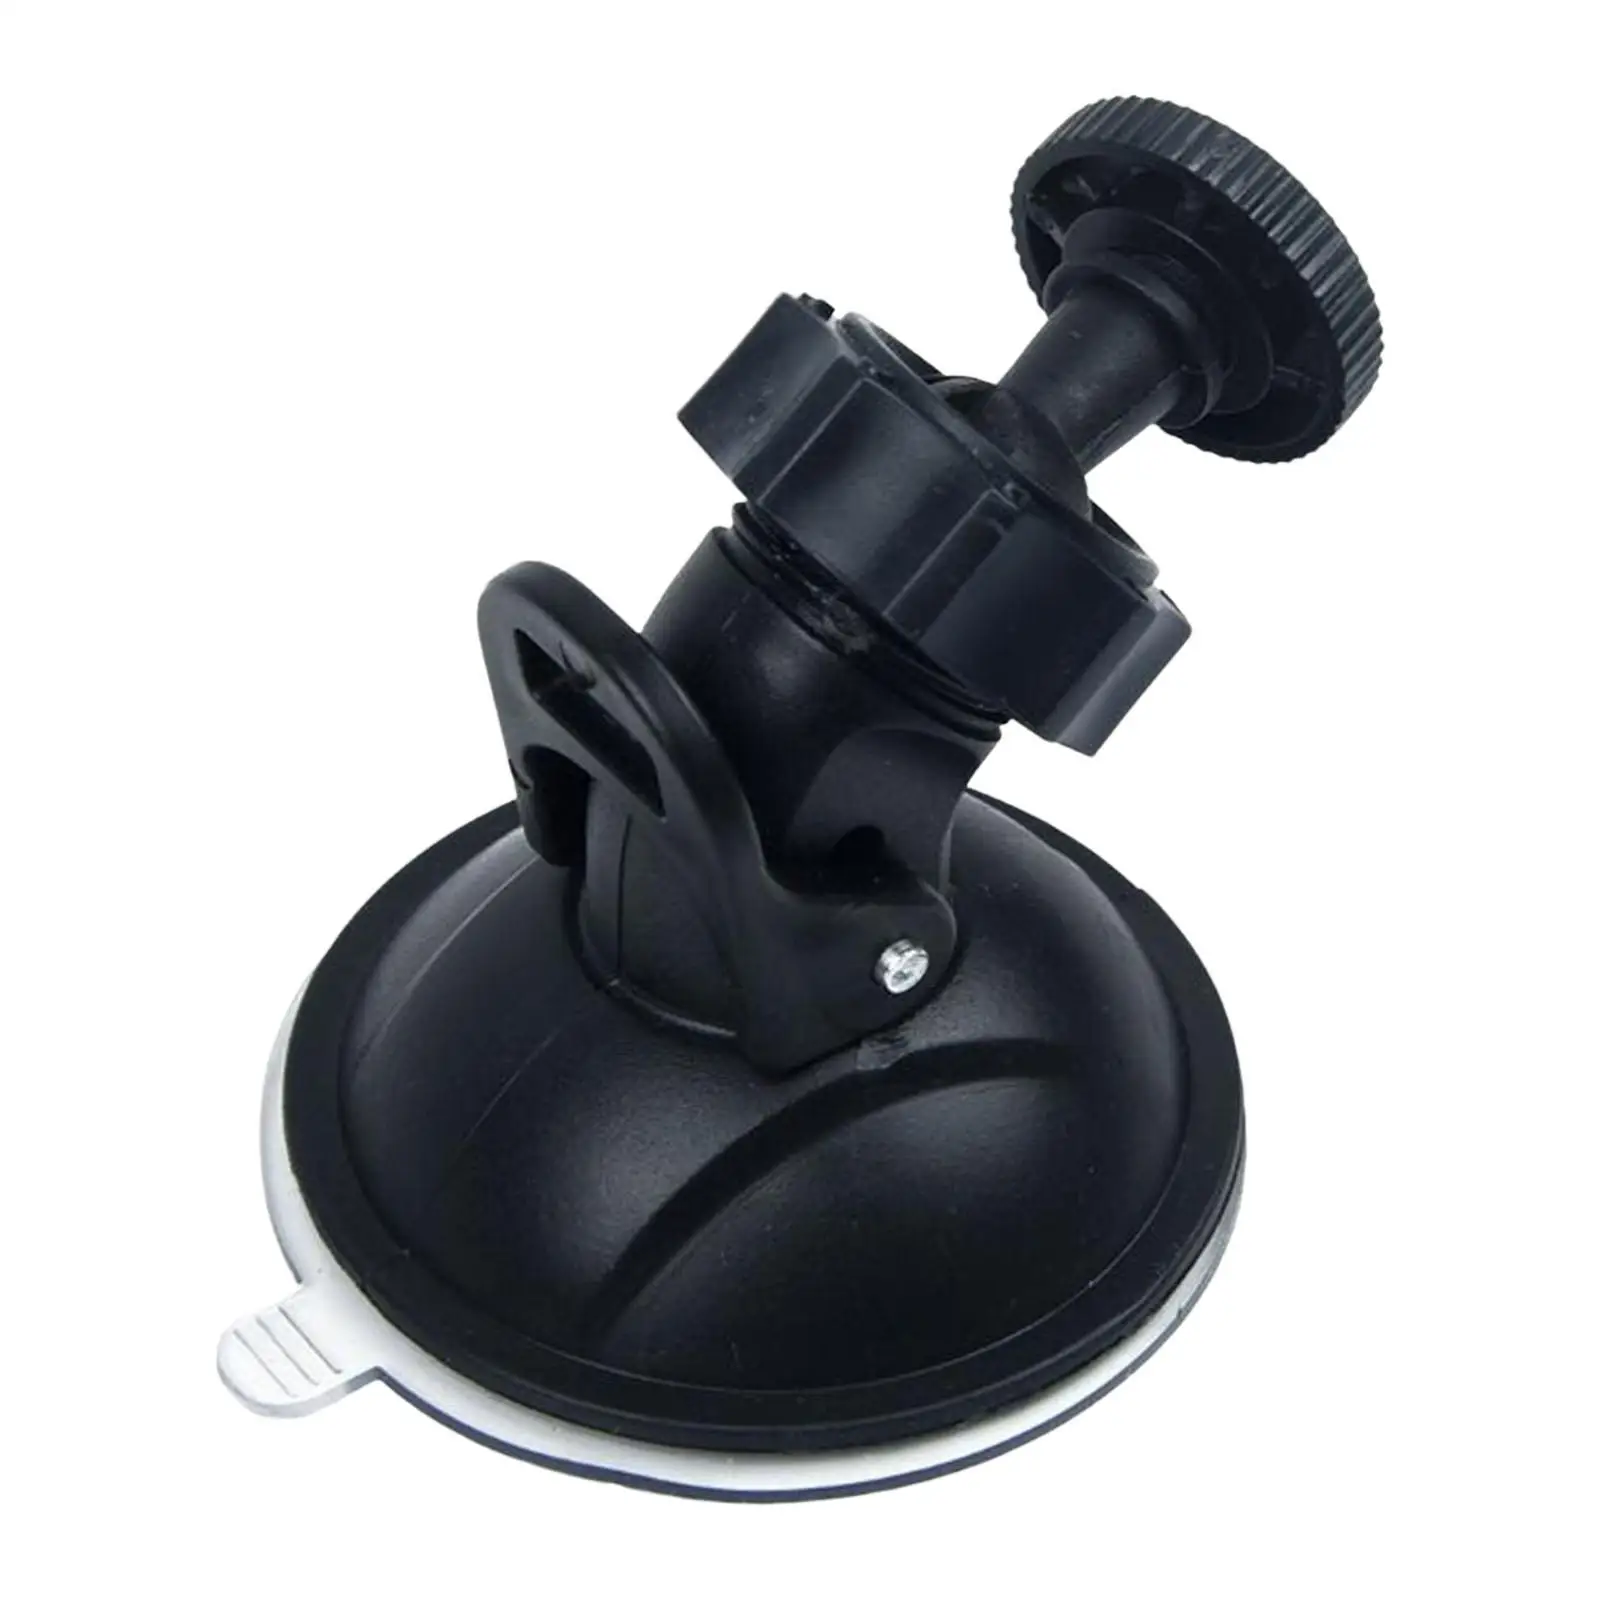 Dash cam Suction Cup Mount Car Video Recorder Holder Bracket Travel Driving